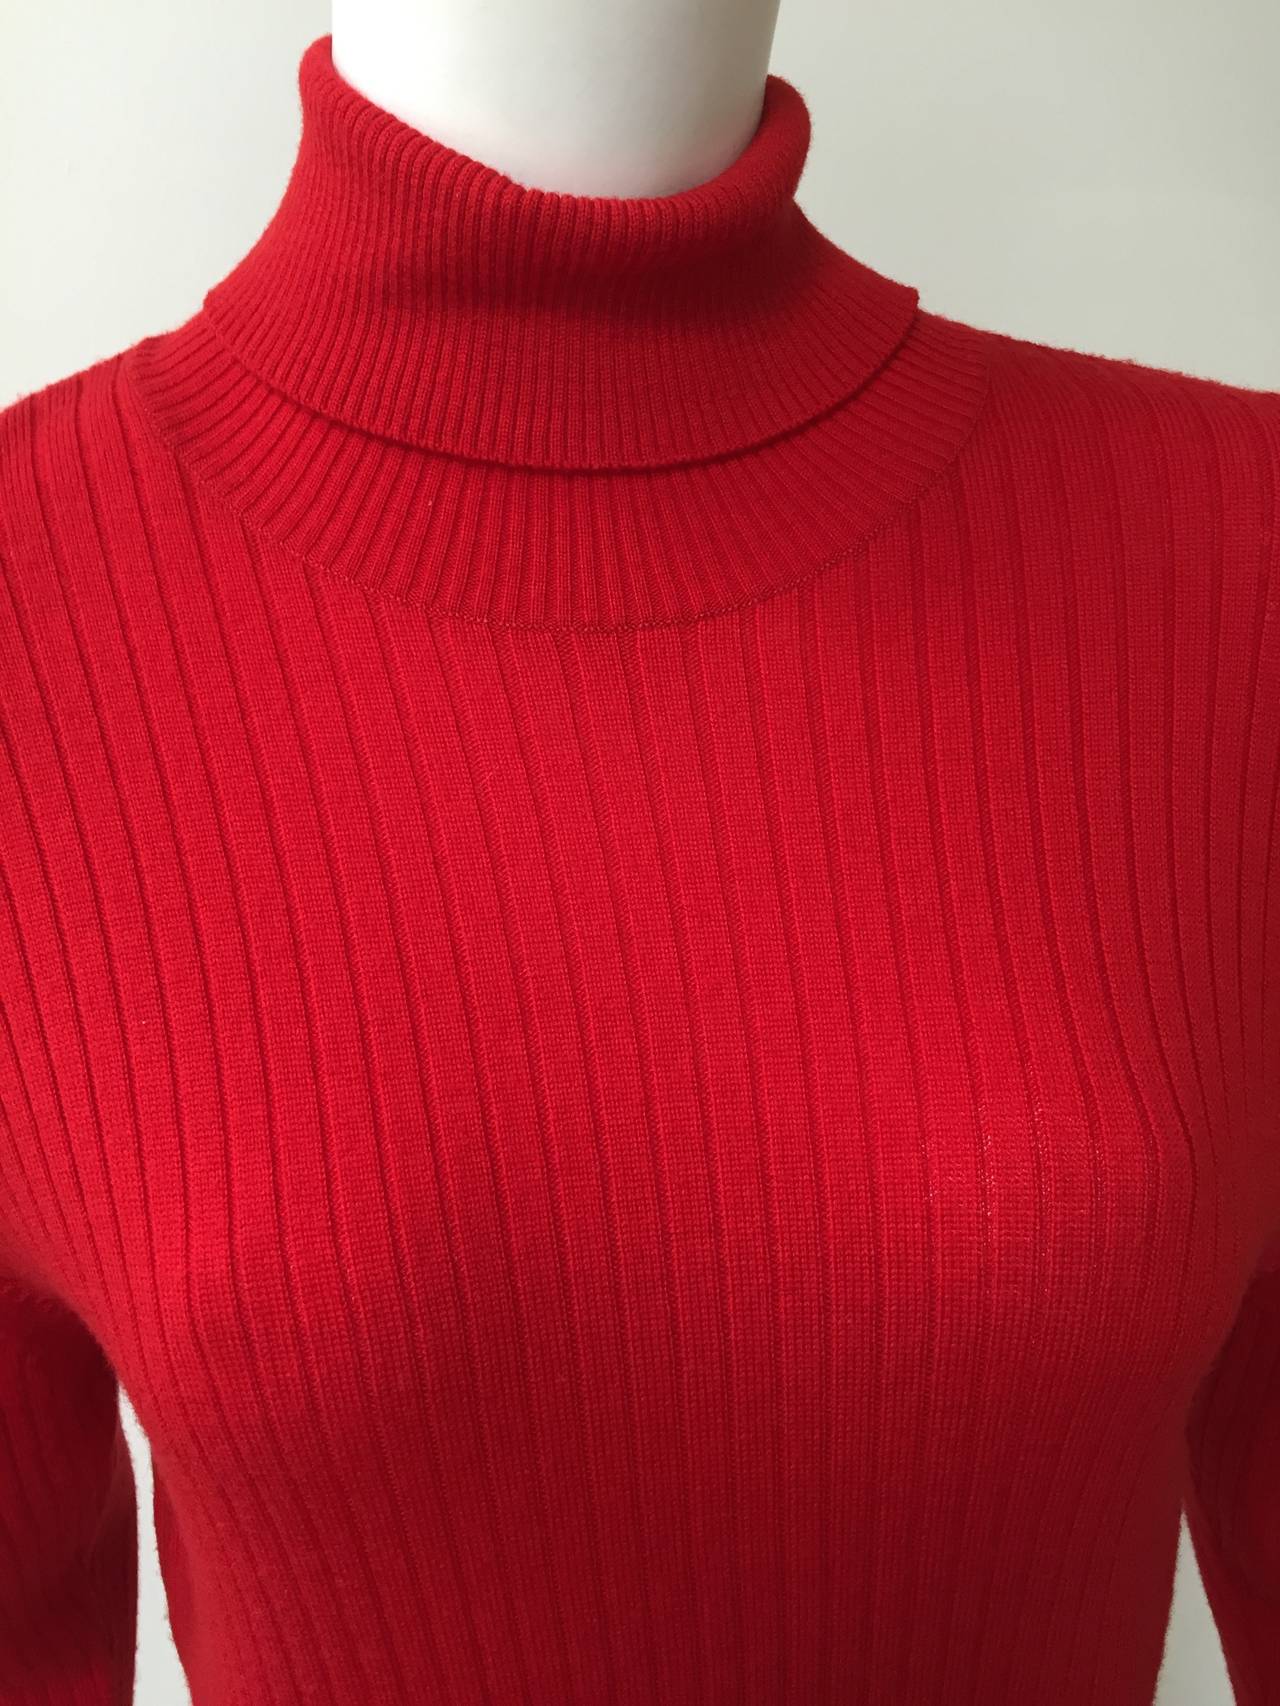 Chanel 80s Red Wool Knit Sweater Size 6. at 1stdibs